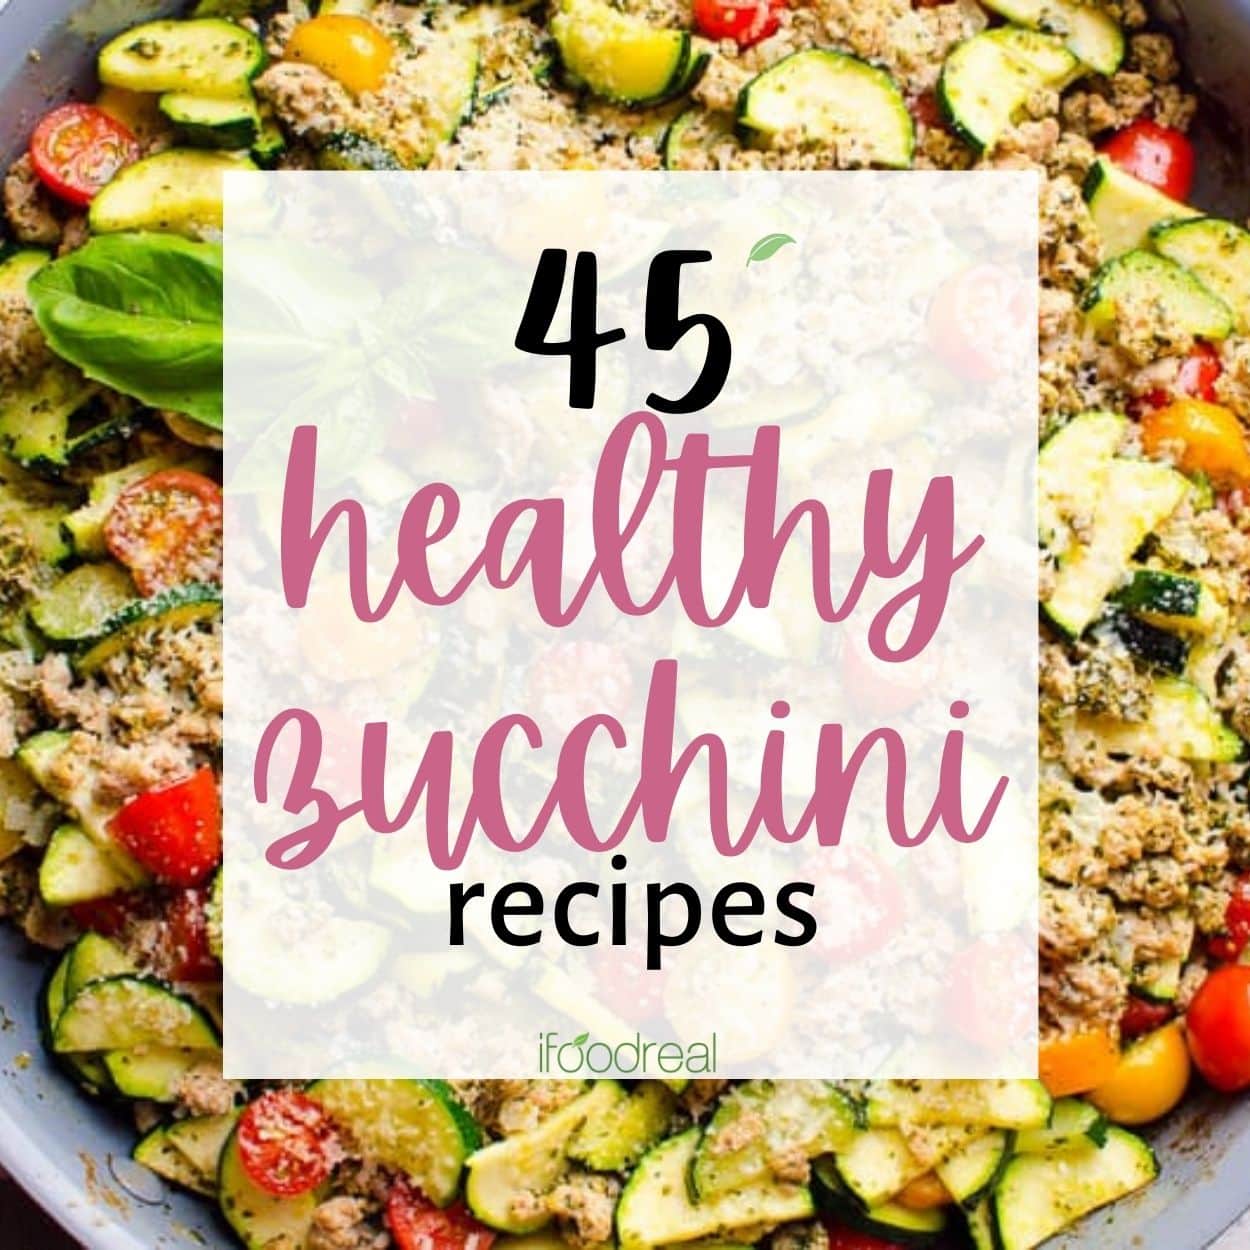 Healthy zucchini recipes with zucchini, ground turkey and tomatoes in a skillet.